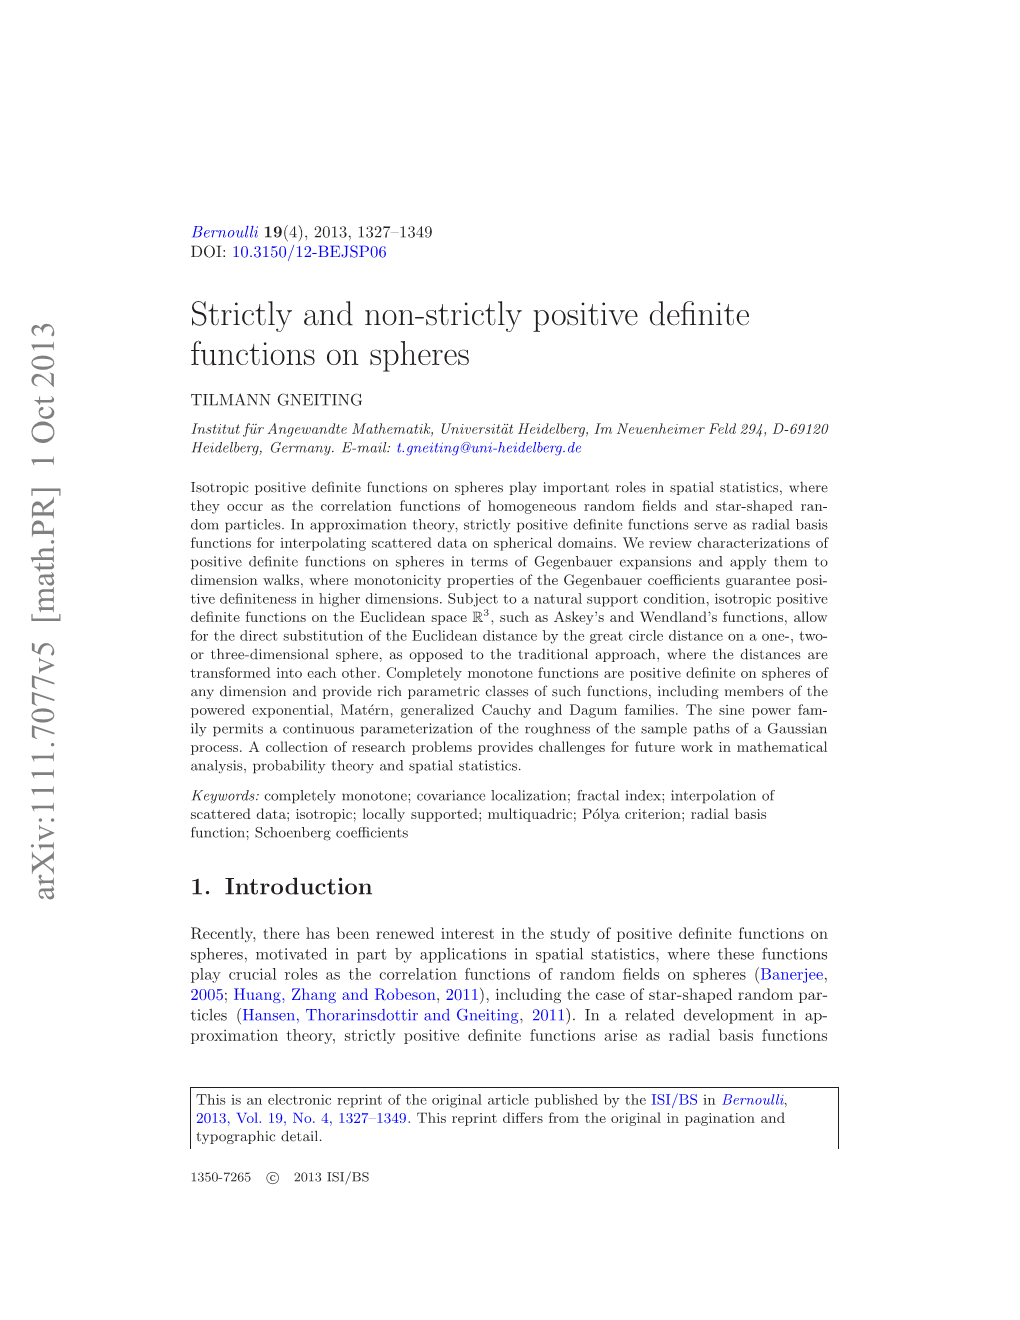 Strictly and Non-Strictly Positive Definite Functions on Spheres